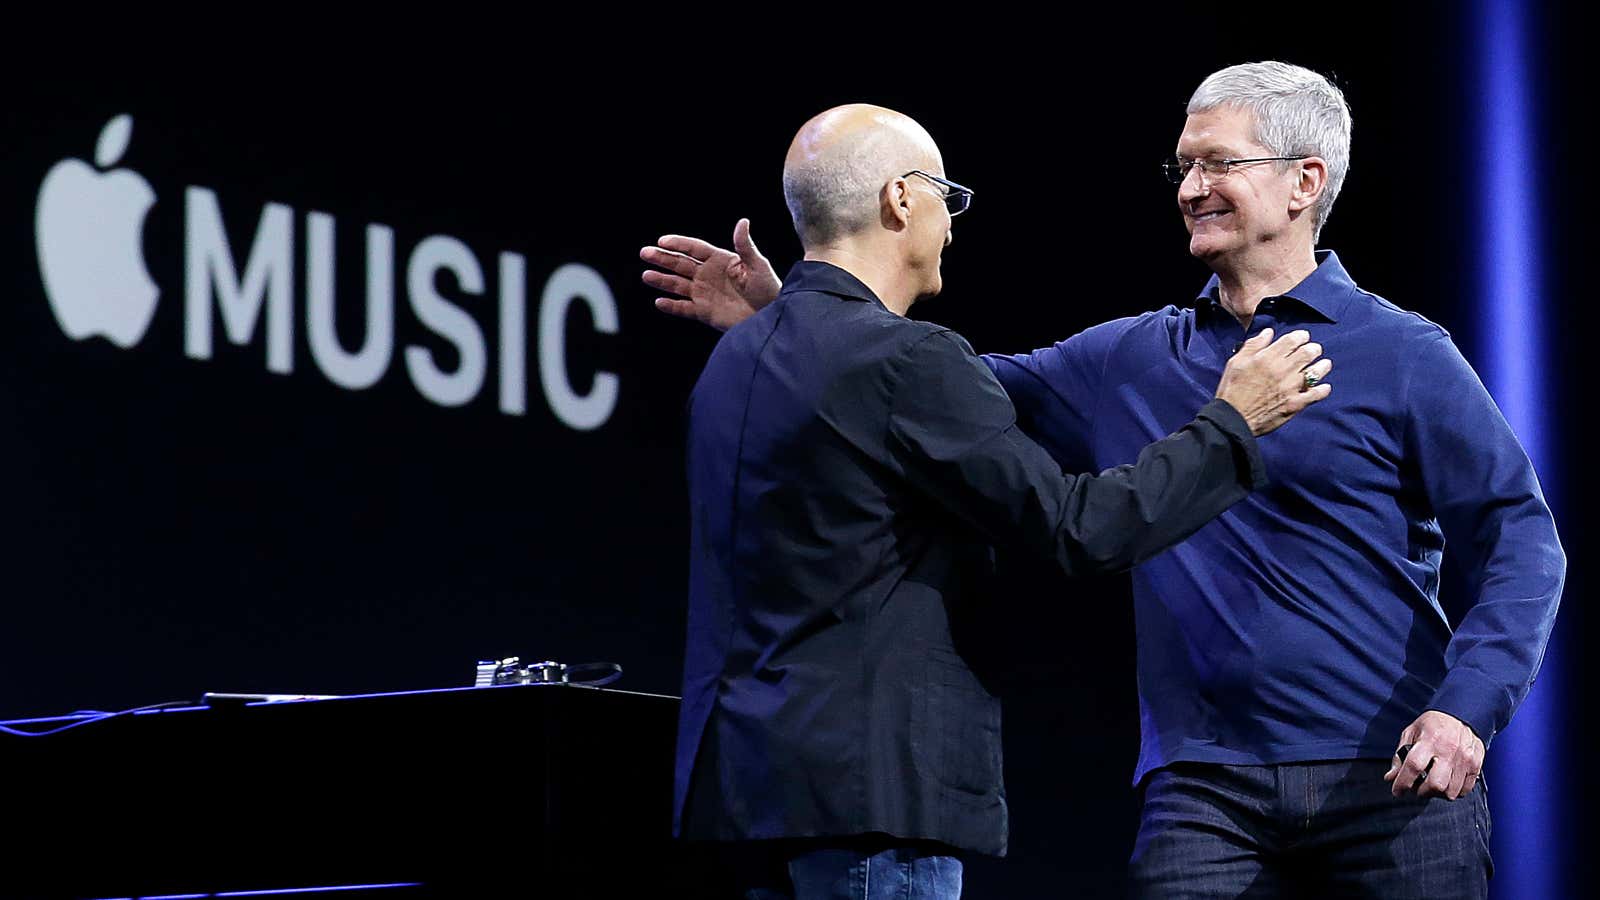 A pat on the back for Jimmy Iovine.